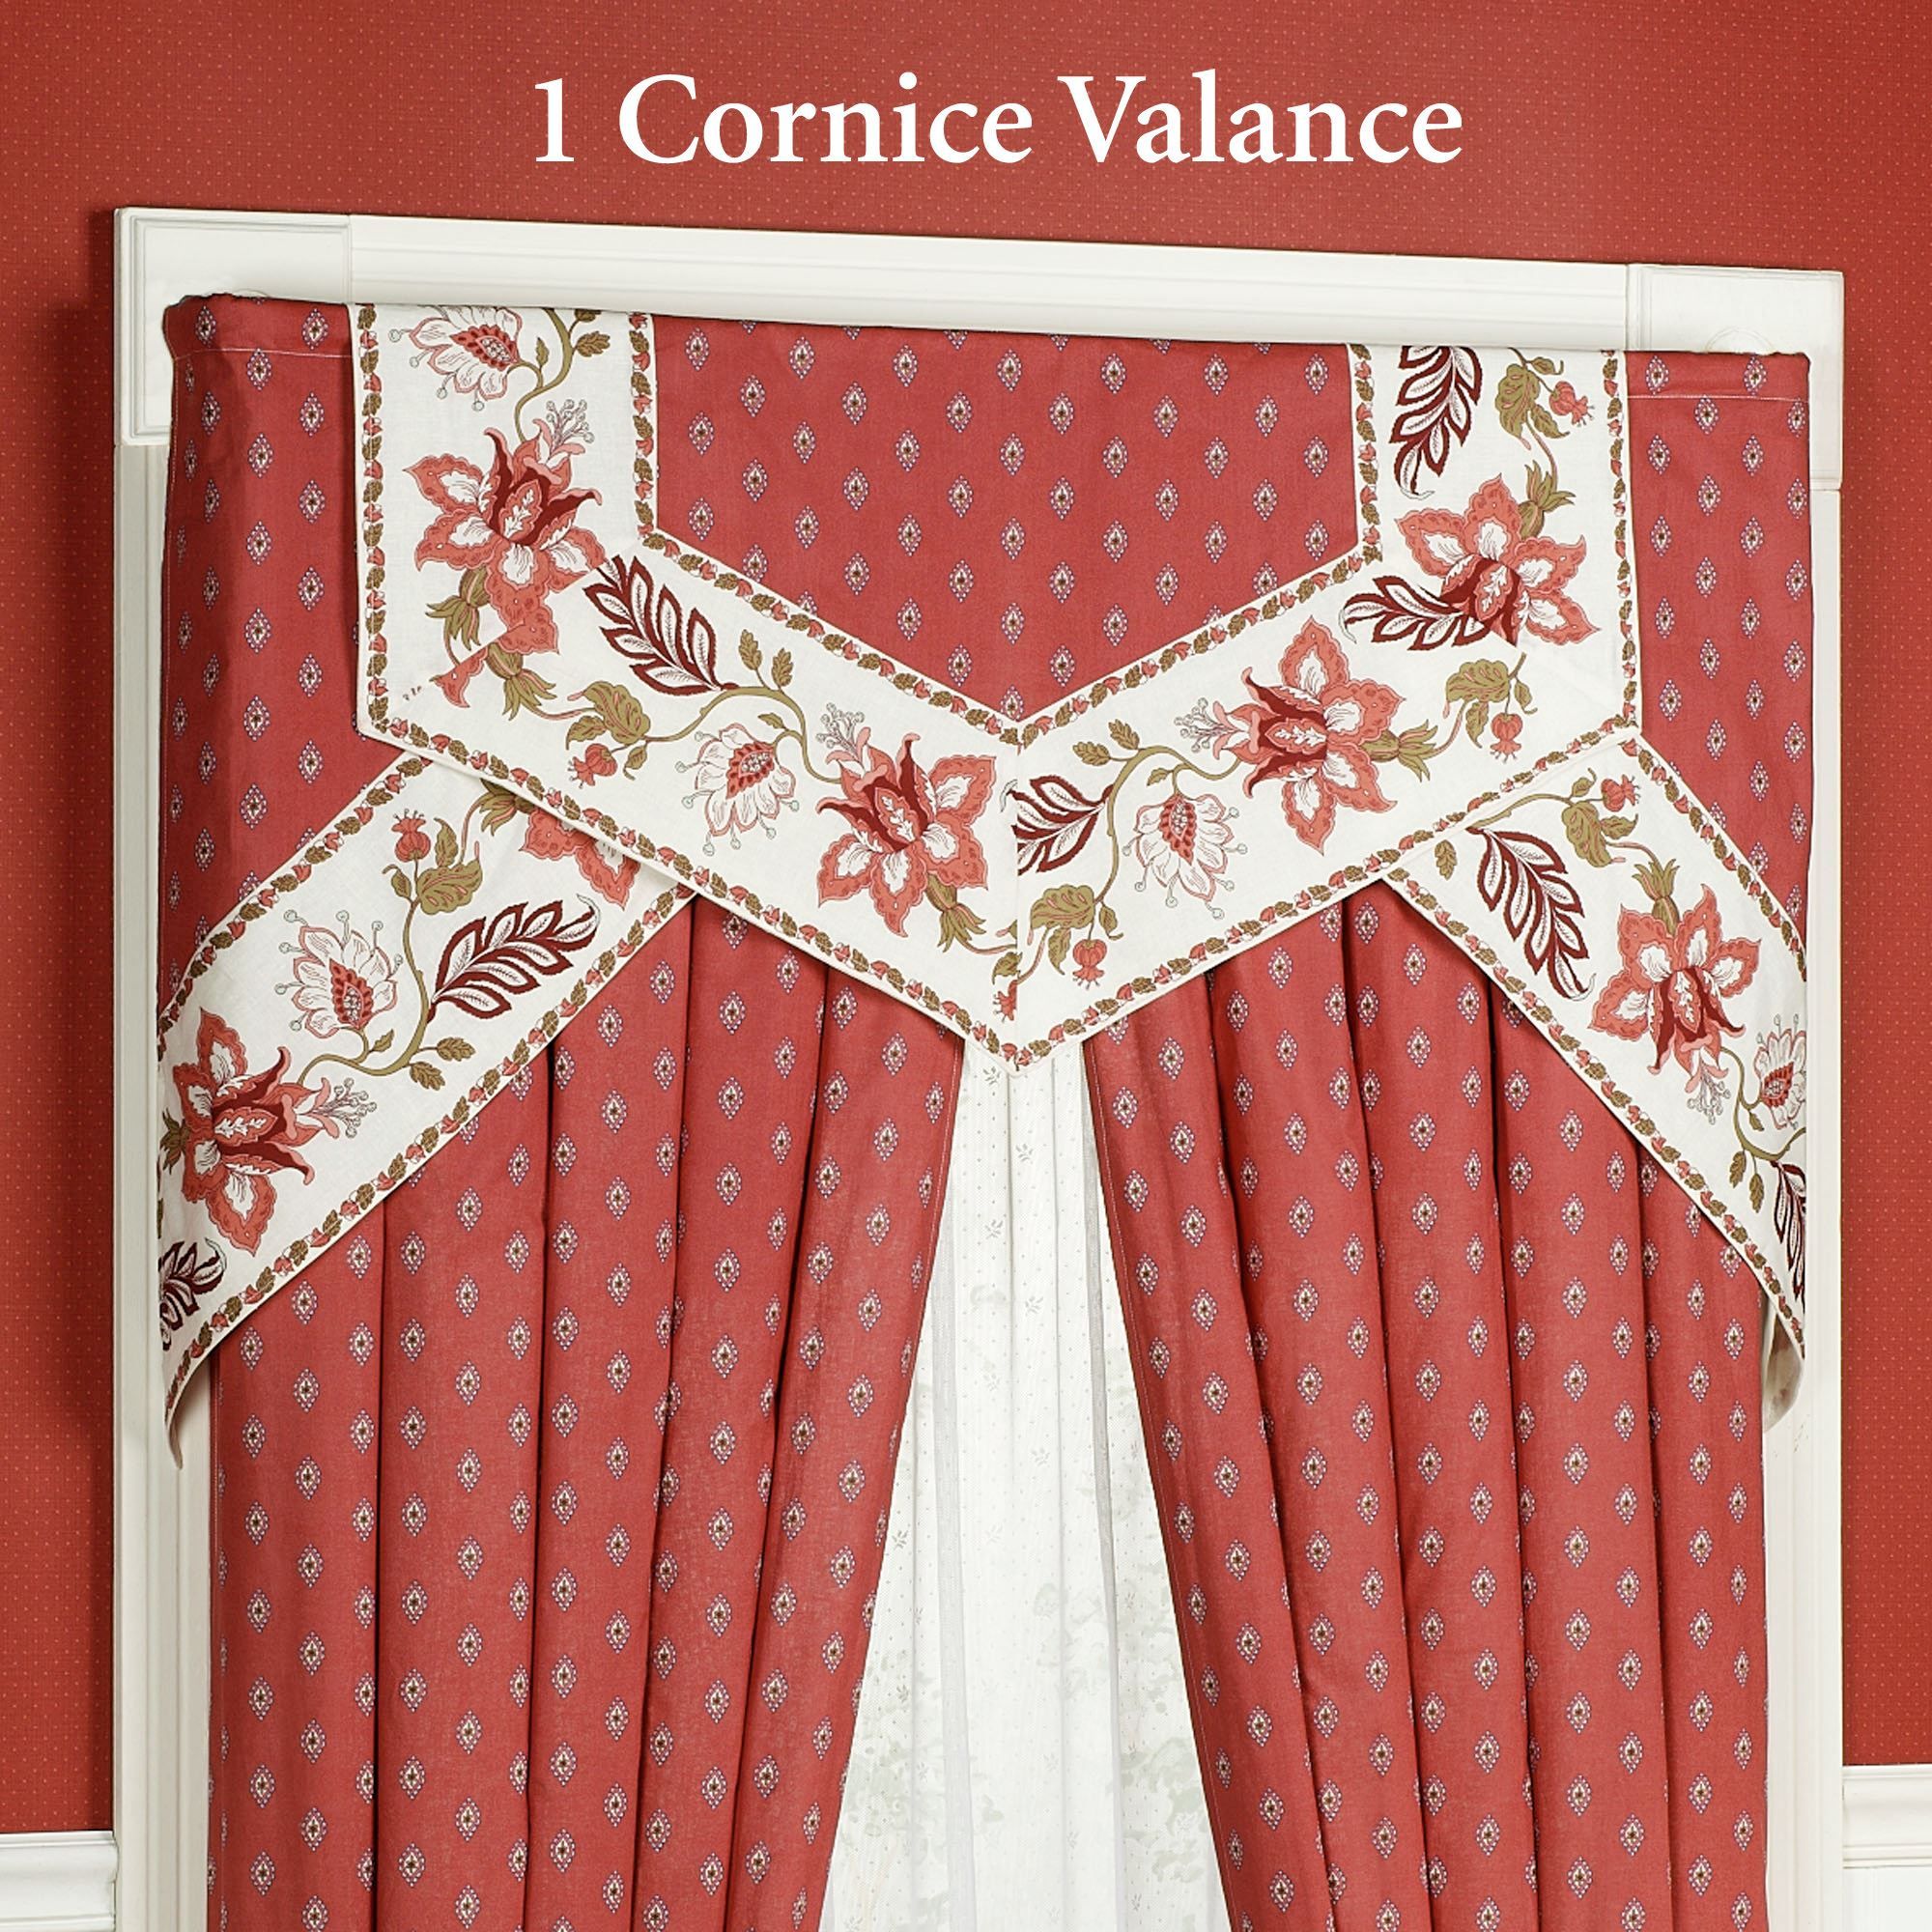 Chateau Rouge Cornice Valance Window Treatment Within Chateau Wines Cottage Kitchen Curtain Tier And Valance Sets (View 11 of 20)